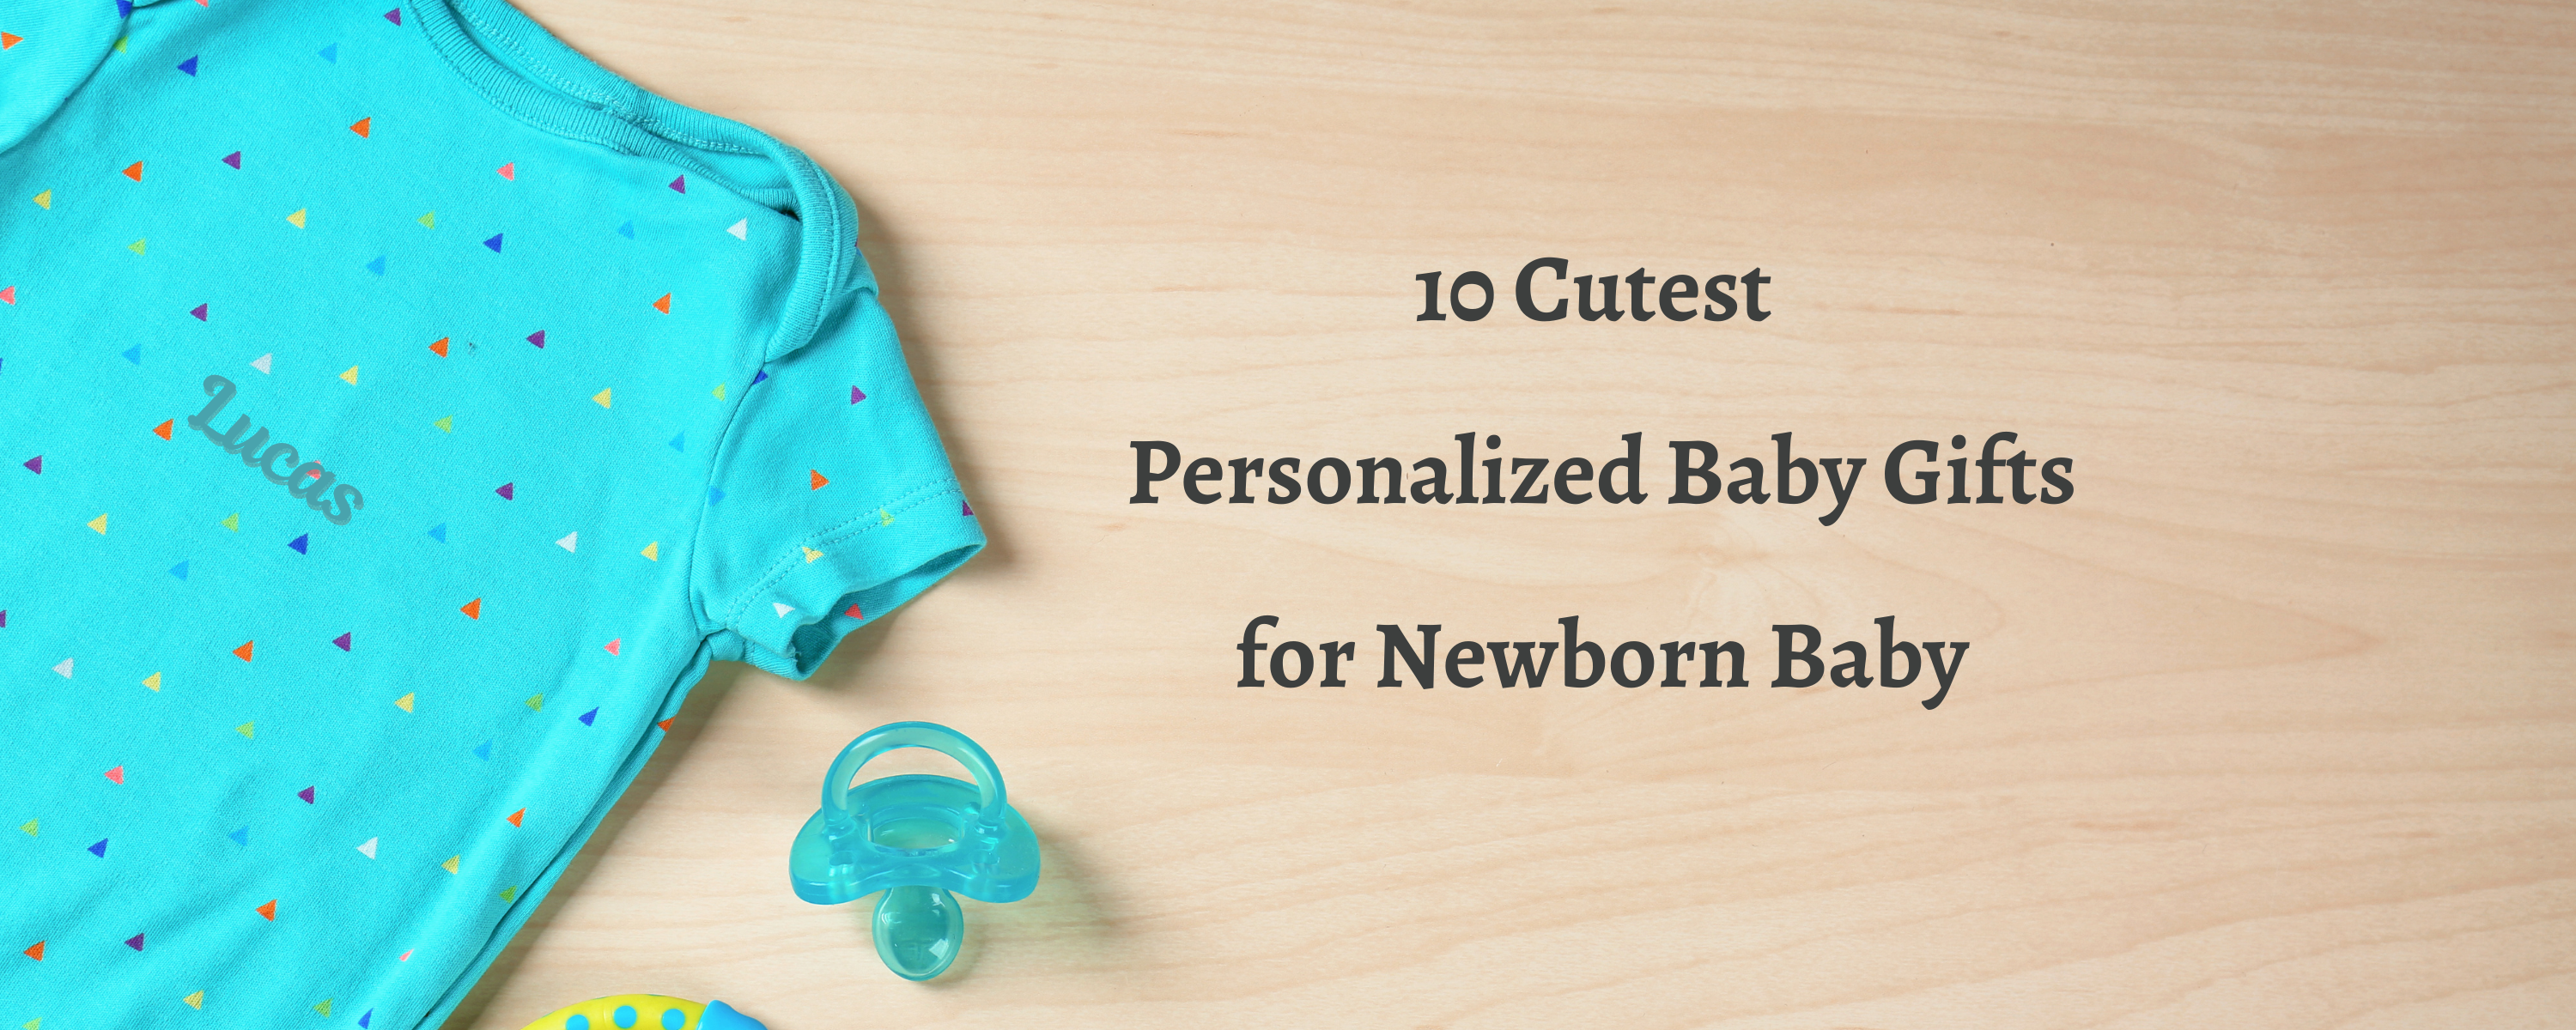 10 Cutest Personalized Baby Gifts for Newborn baby